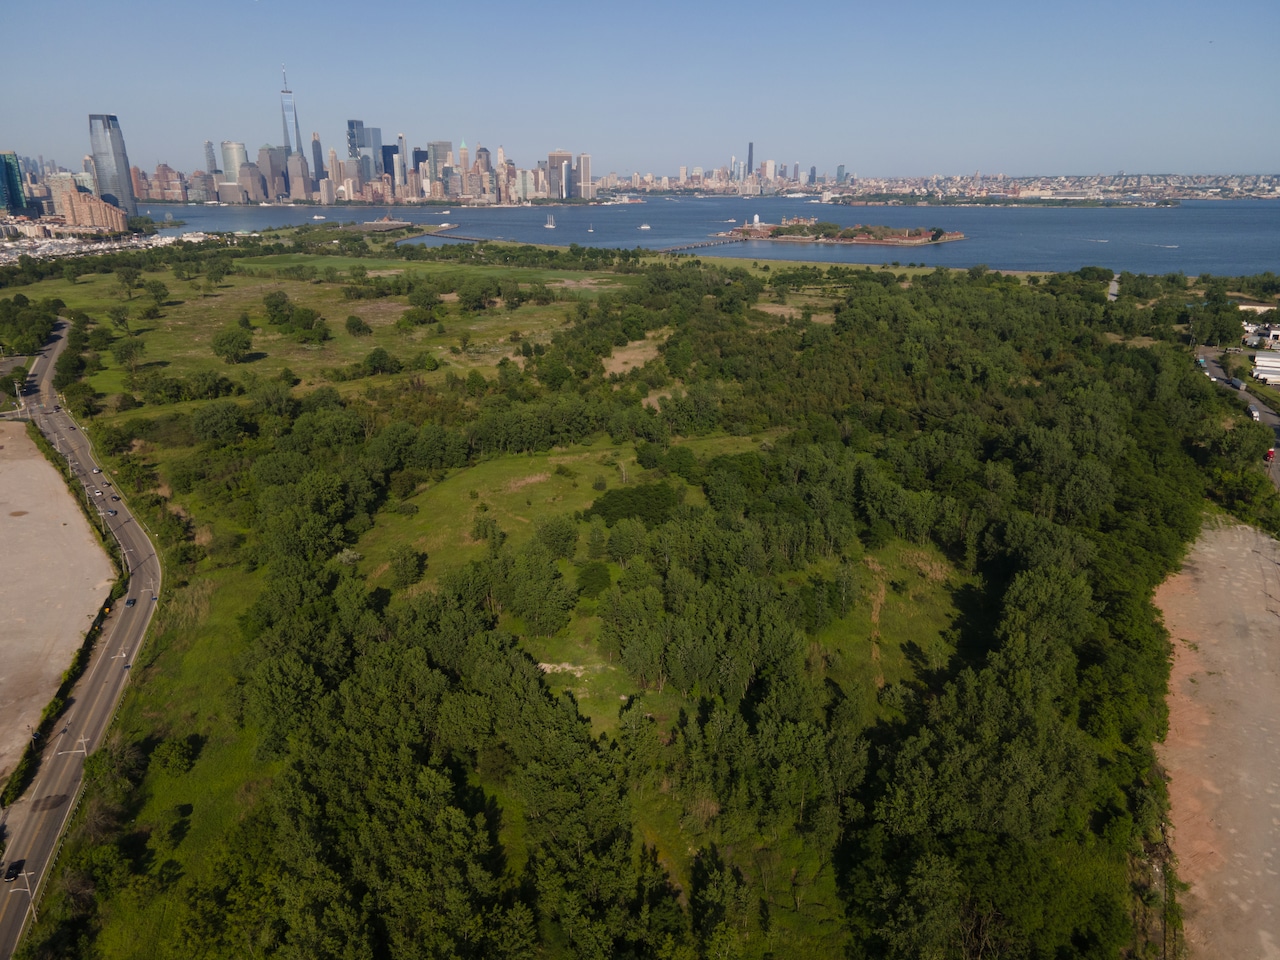 Free shuttle service inside Liberty State Park begins today [Video]